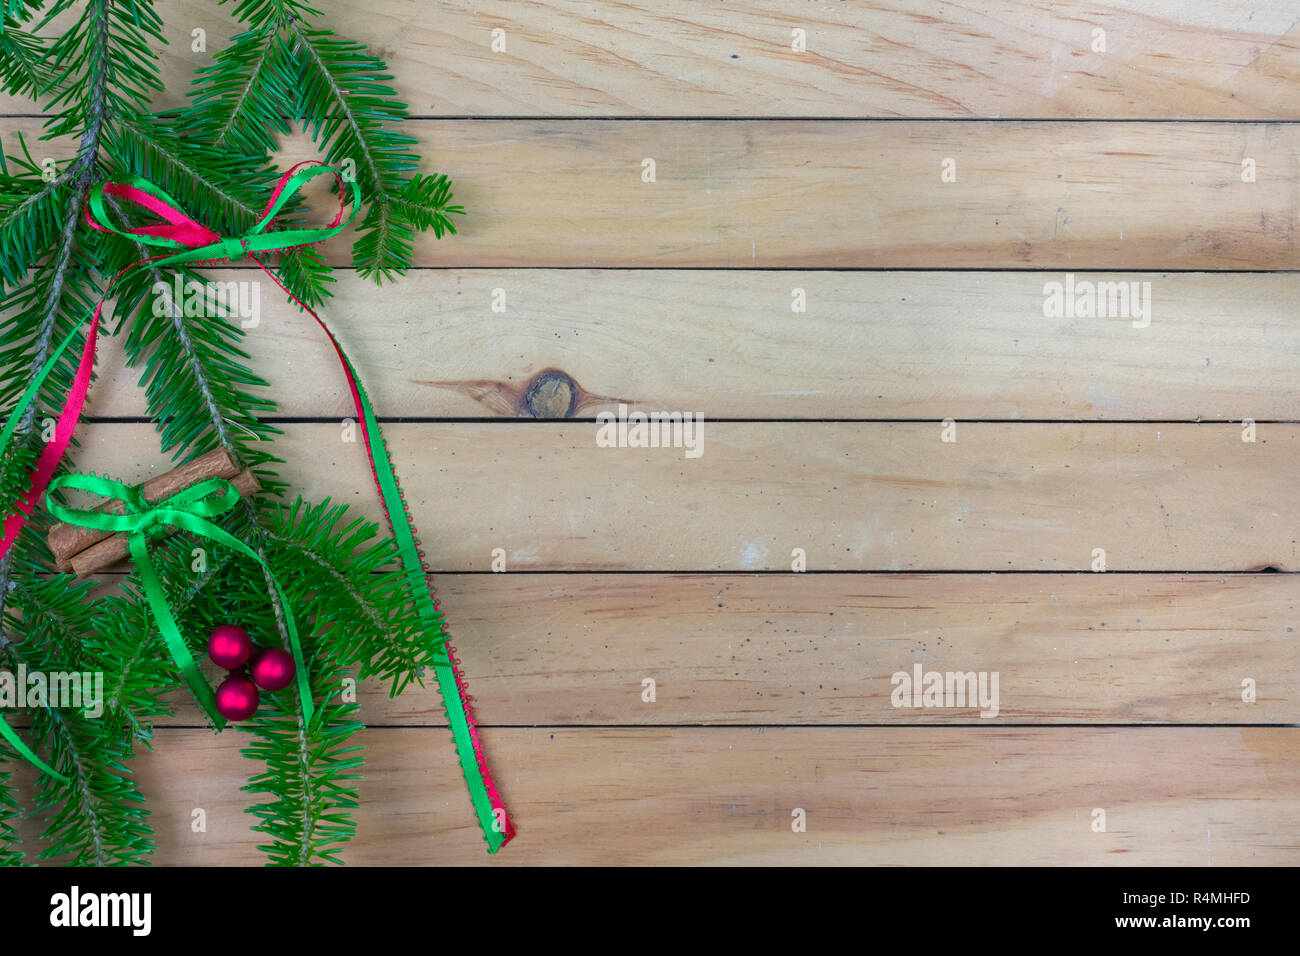 A spruce bough with a red and green ribbon bow, cinnamon sticks, and red berries  on a wooden slat background with copy space Stock Photo